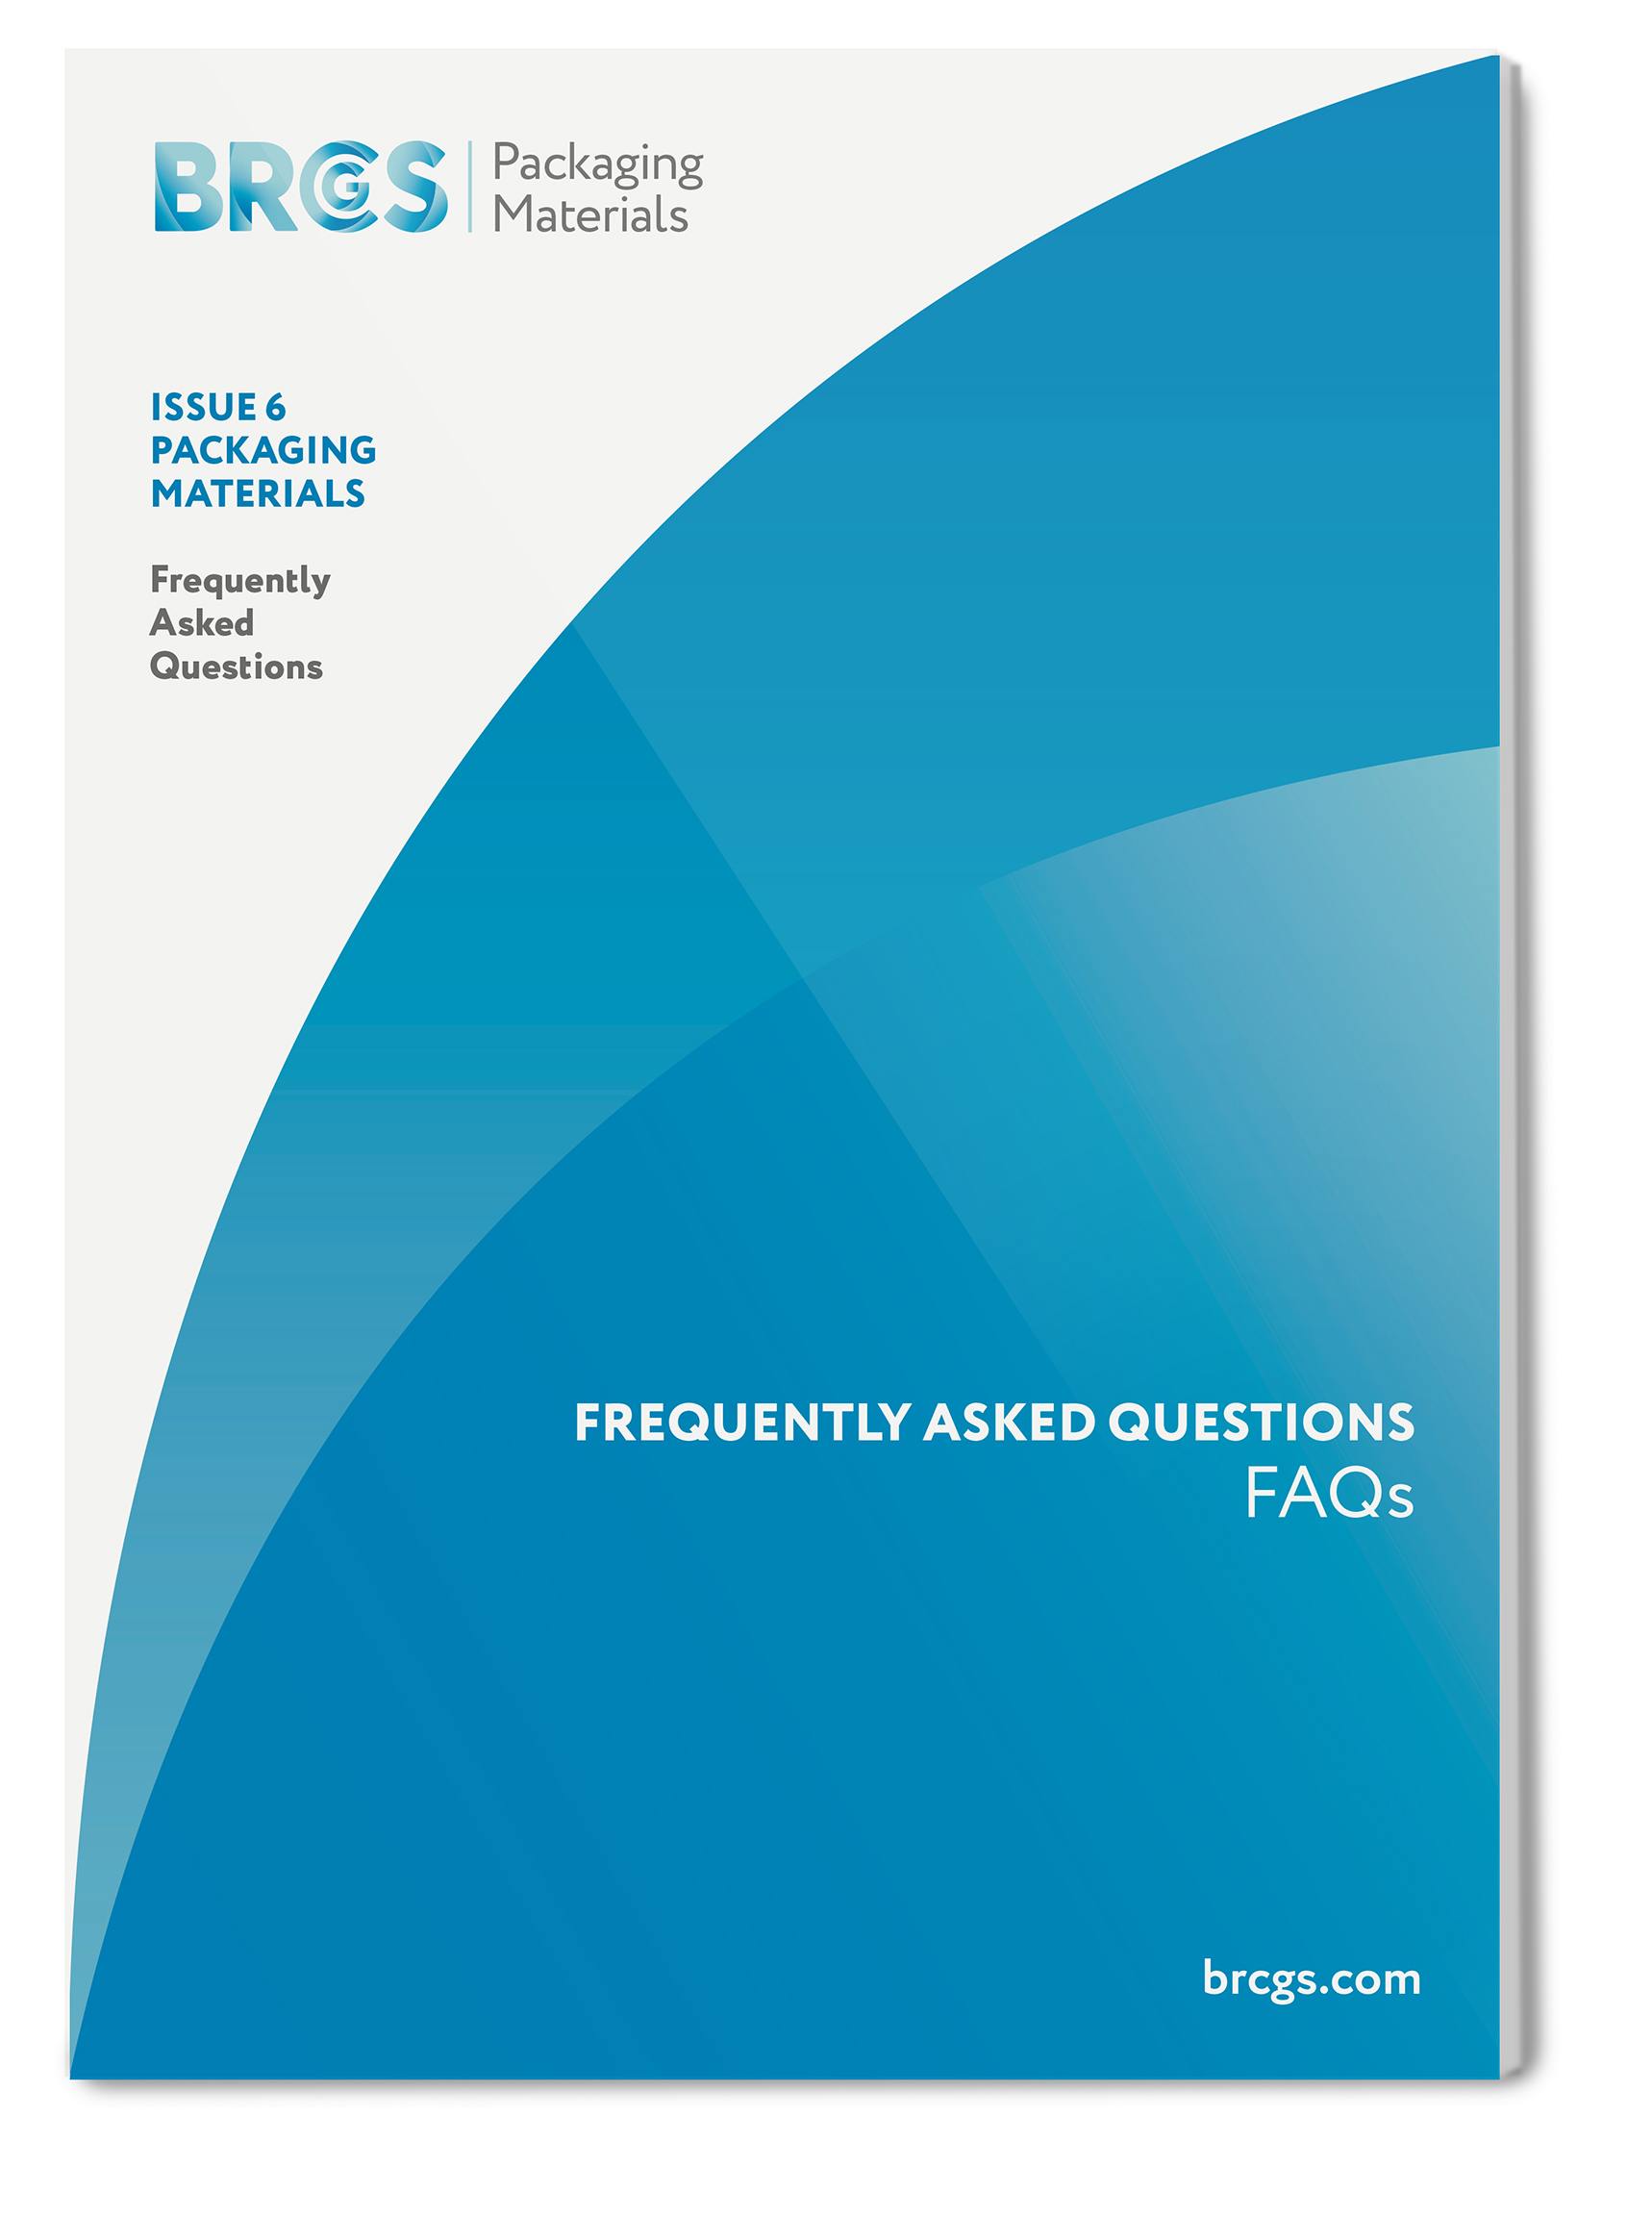 Packaging Materials Issue 6 Frequently Asked Questions